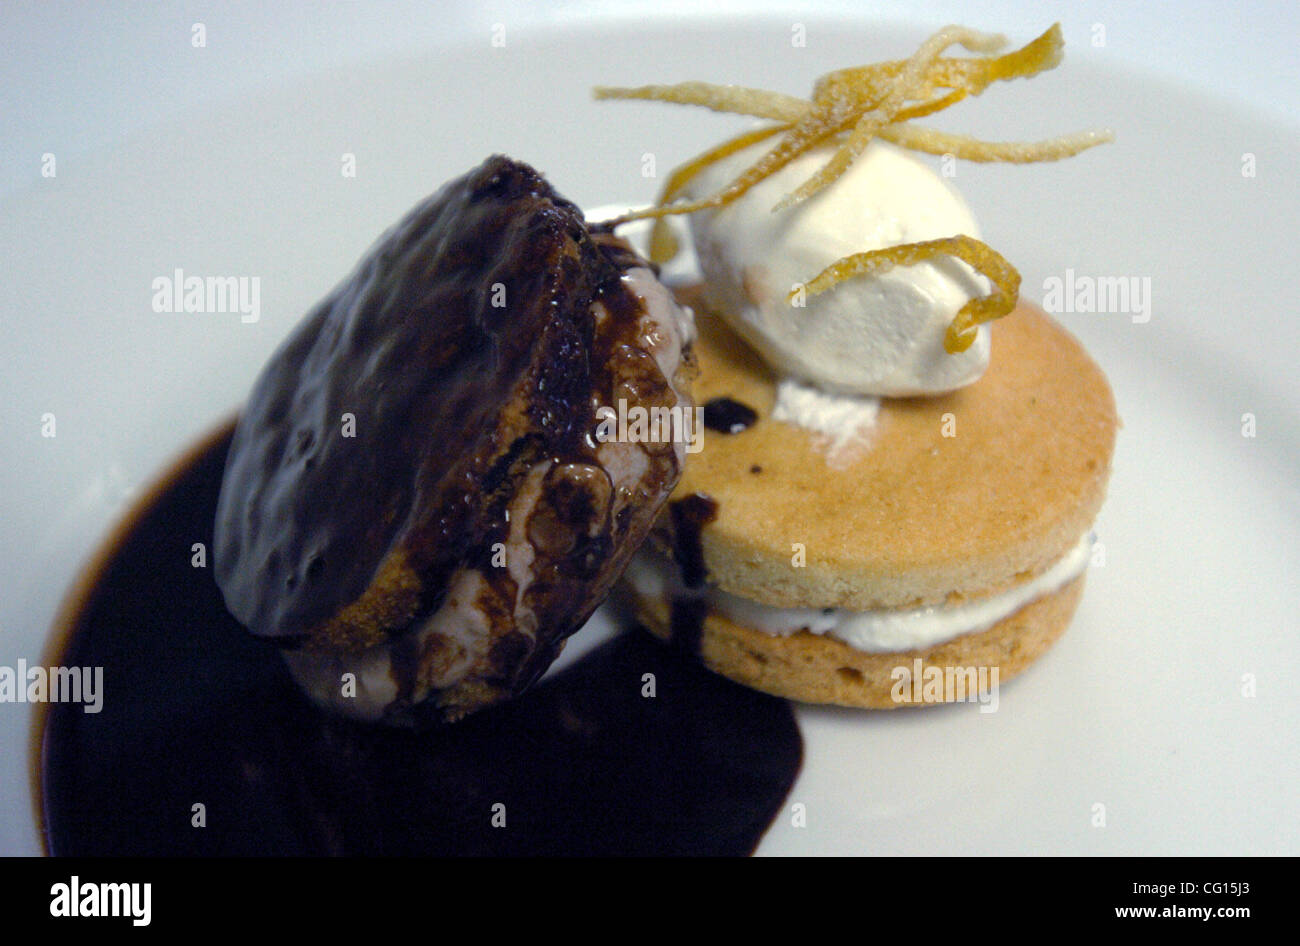 If you head to the recently opened Gigi restaurant in Lafayette, Calif., you'll be able to taste such treats as this dessert featuring two ice cream sandwiches -- chocolate-chip smore and limoncello. Chef Jeffrey Amber of San Francisco recently opened Gigi on Brown Avenue where local favorite Cafe B Stock Photo